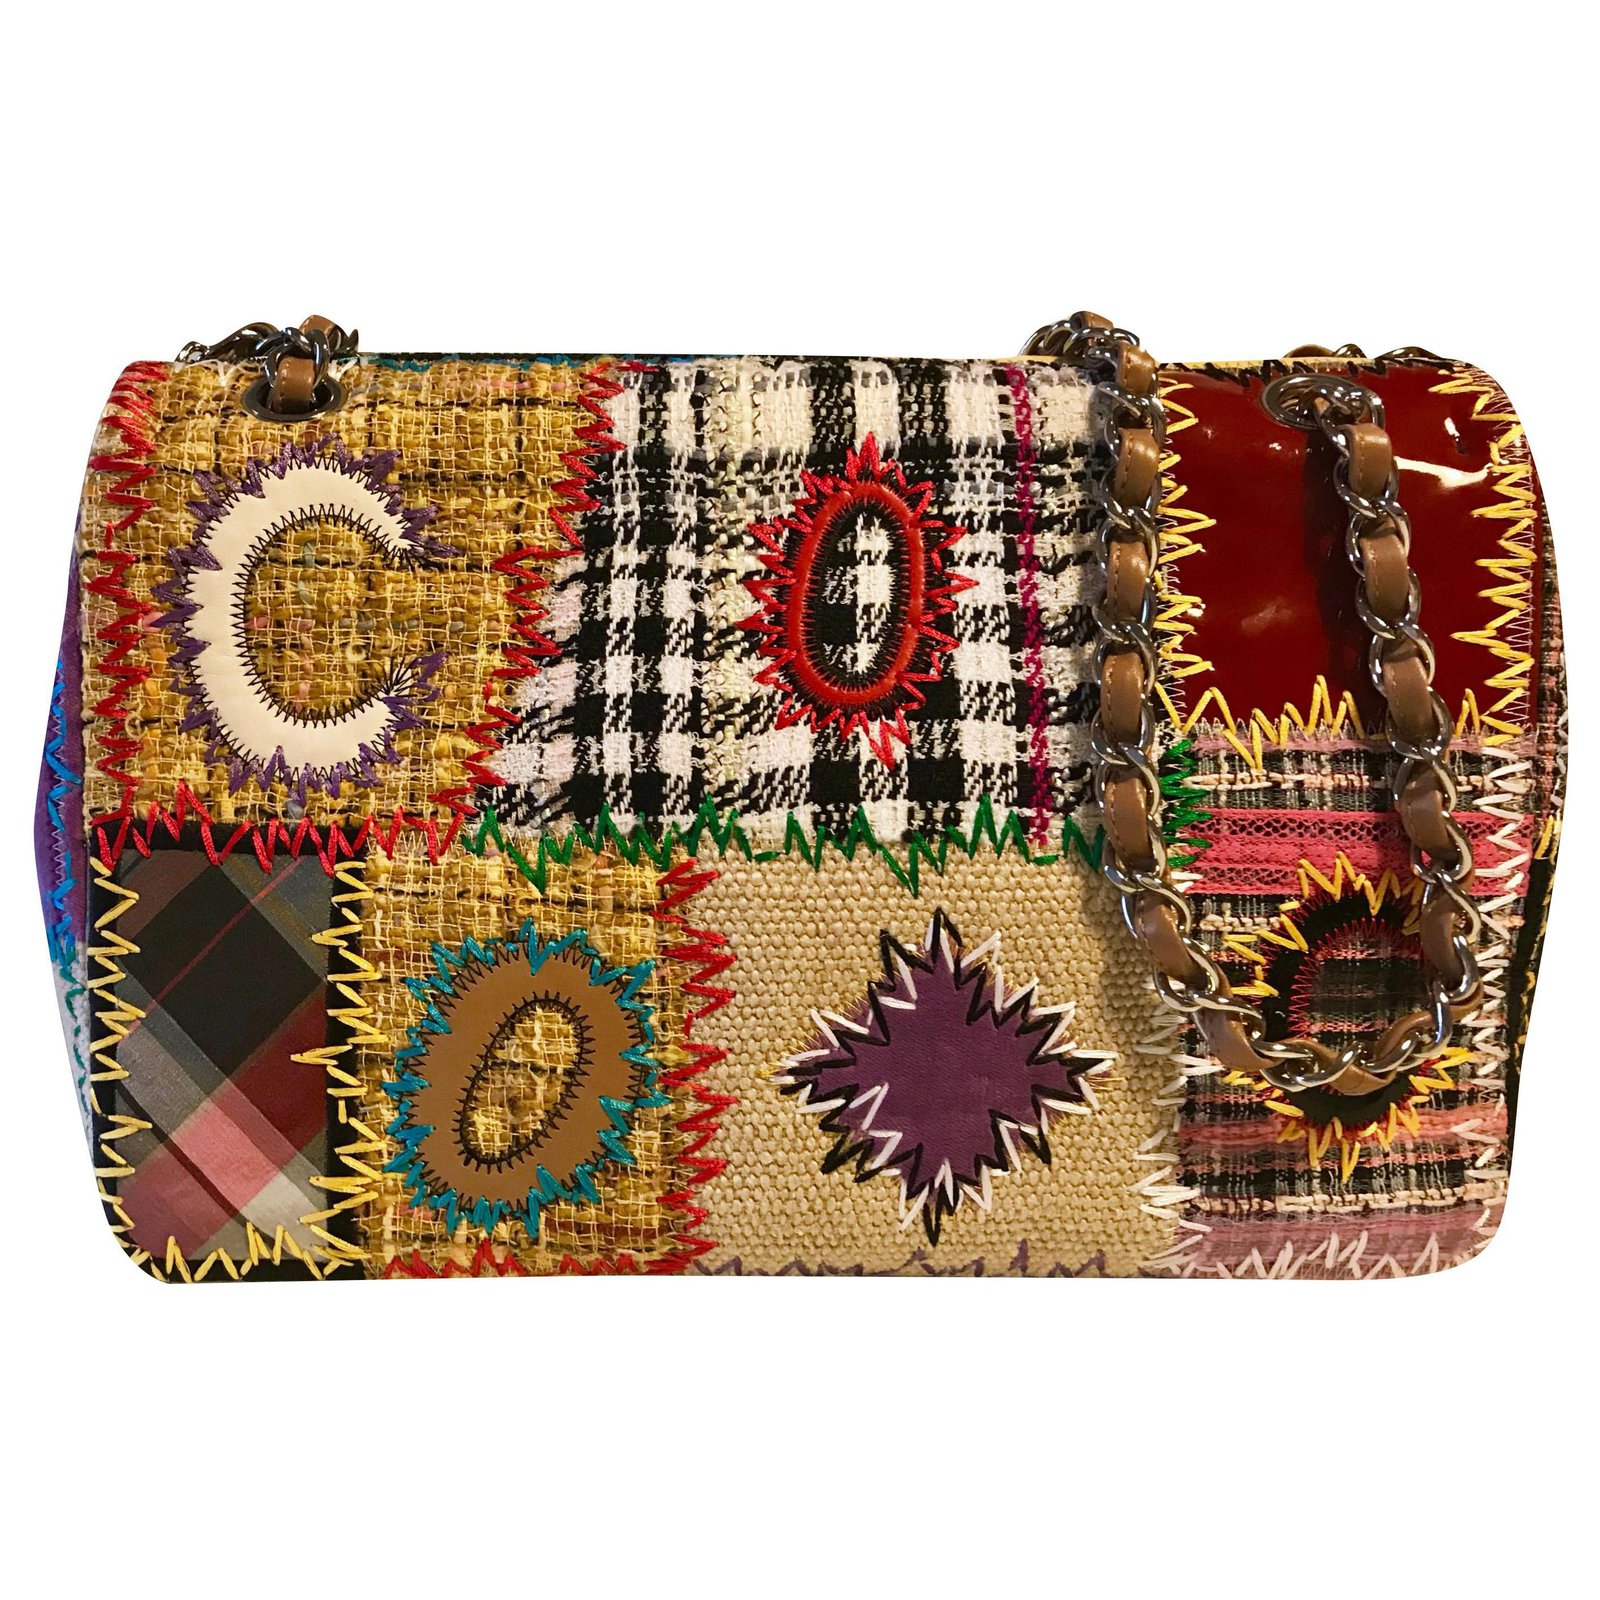 Multicolored Chanel Patchwork Bag